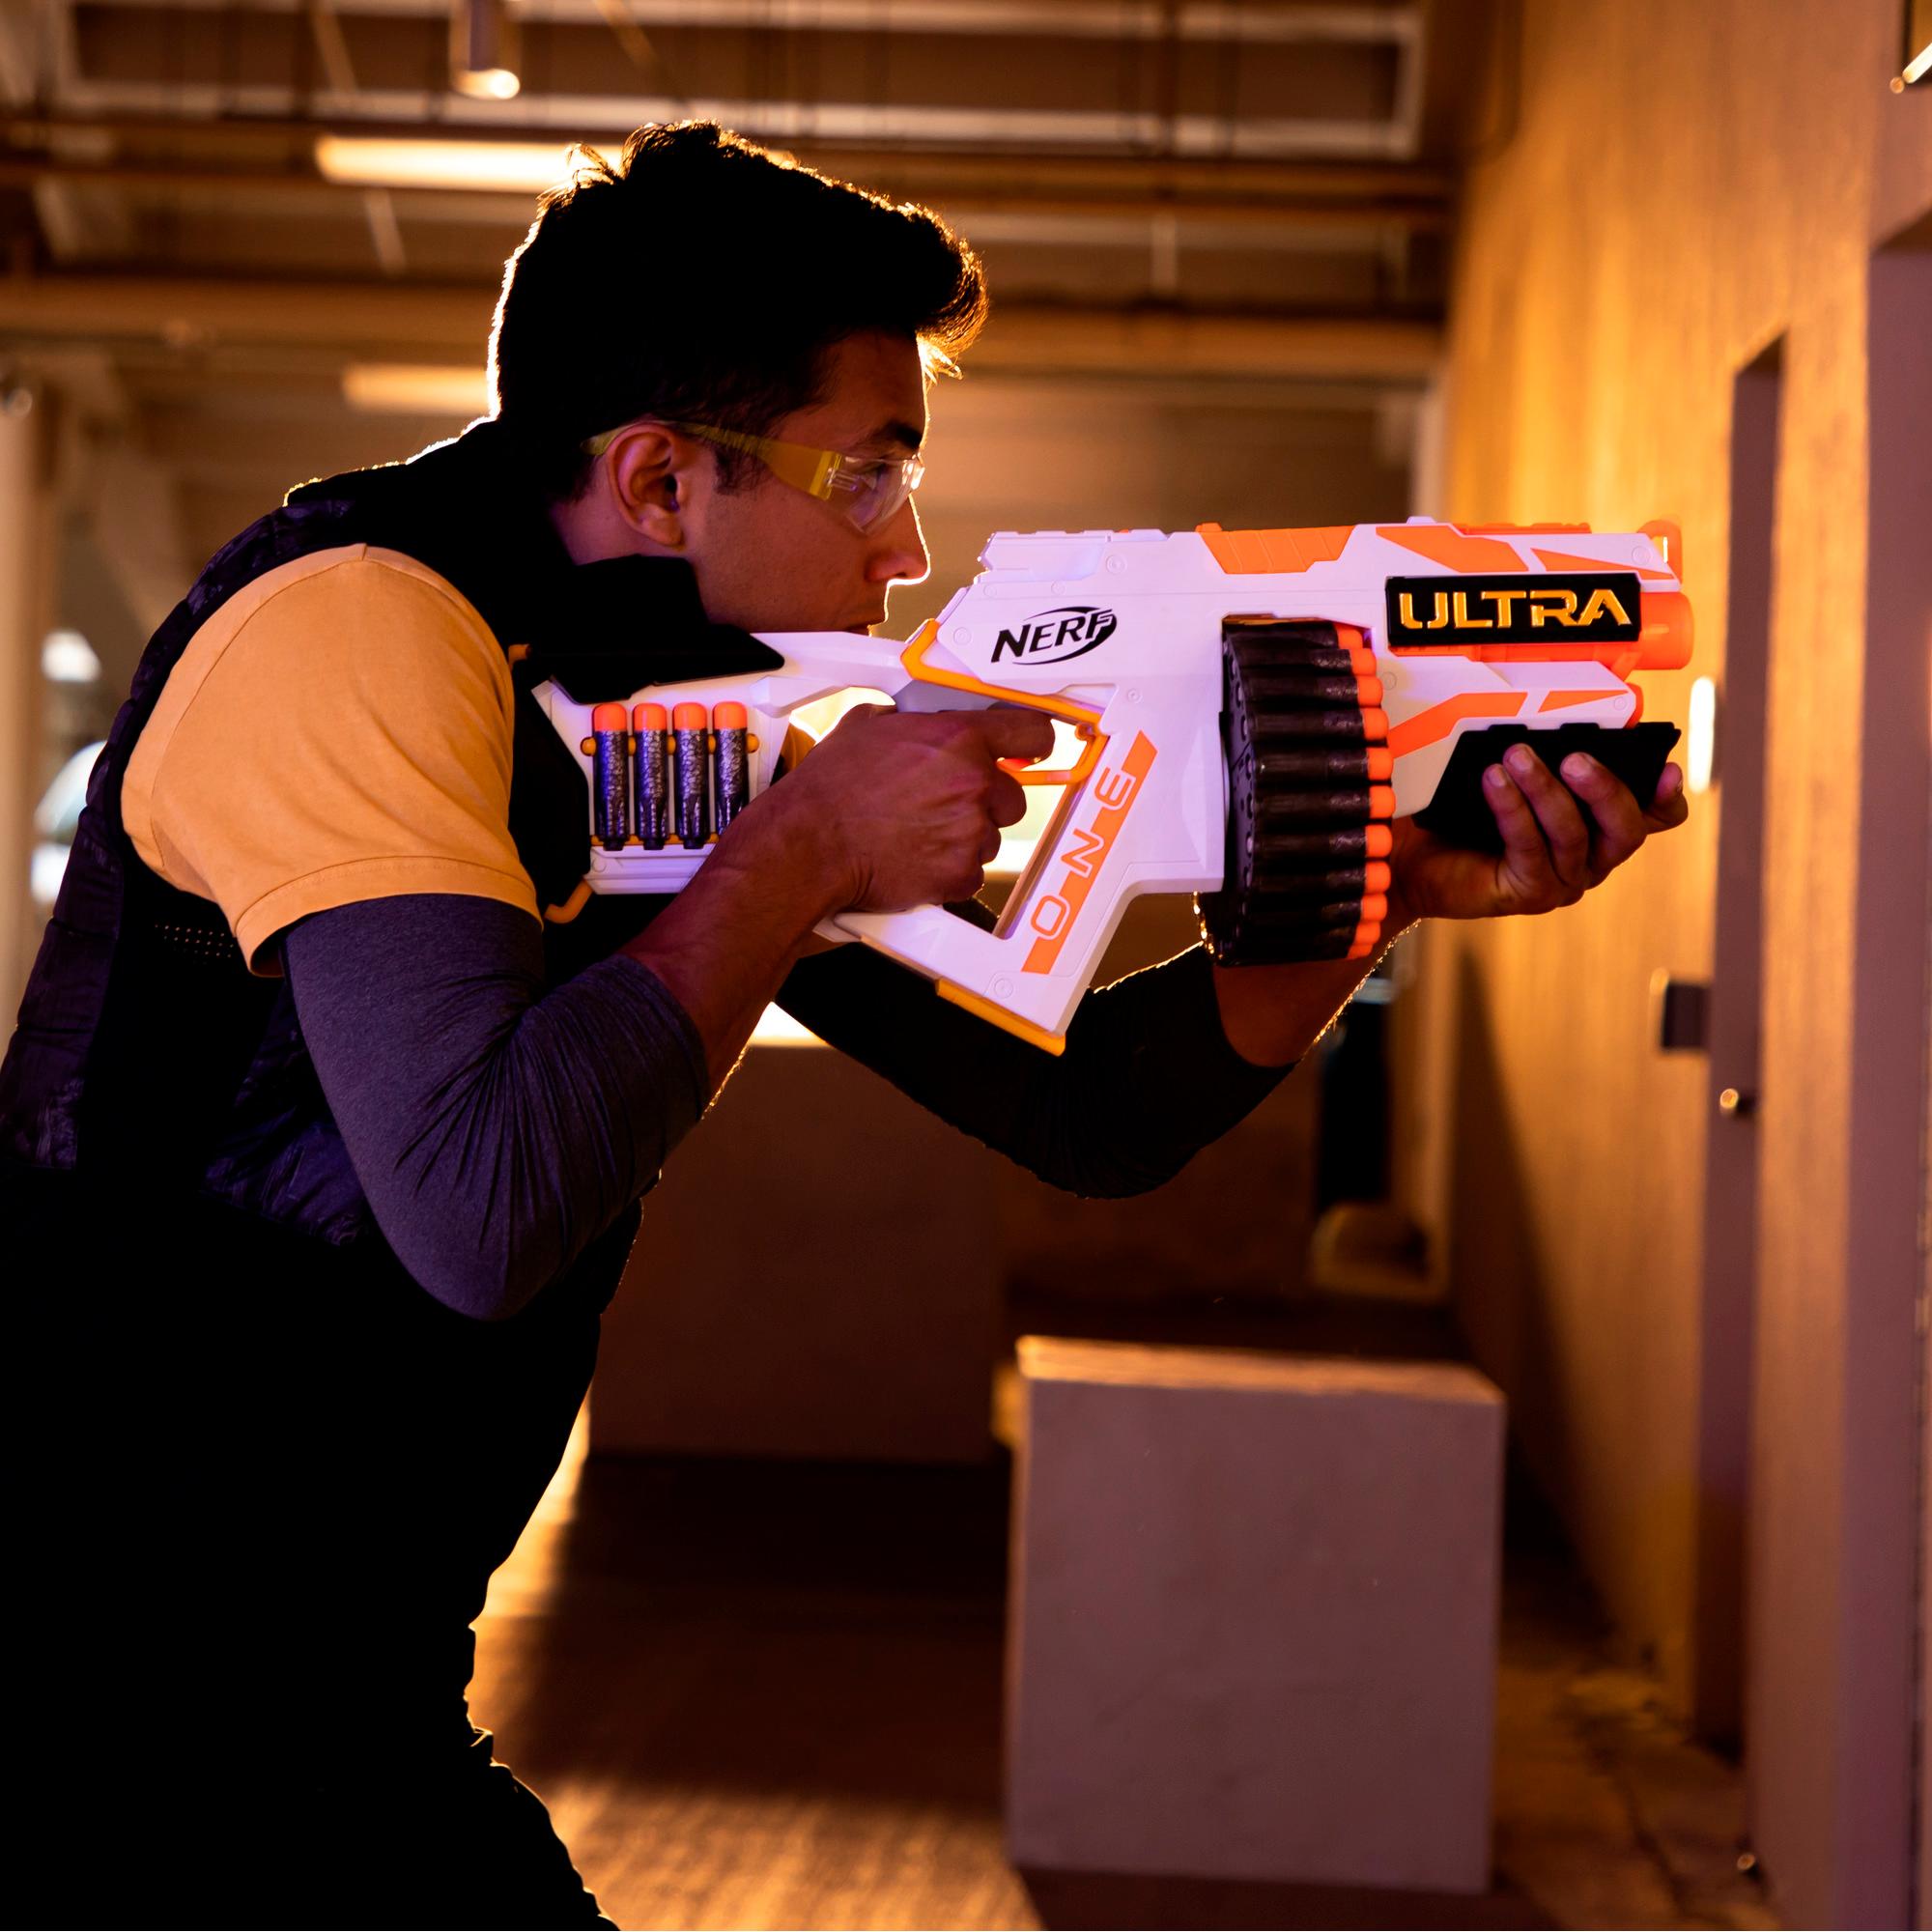 Nerf Ultra One Motorized Blaster -- High Capacity Drum -- 25 Official Nerf Ultra Darts, the Farthest Flying Nerf Darts